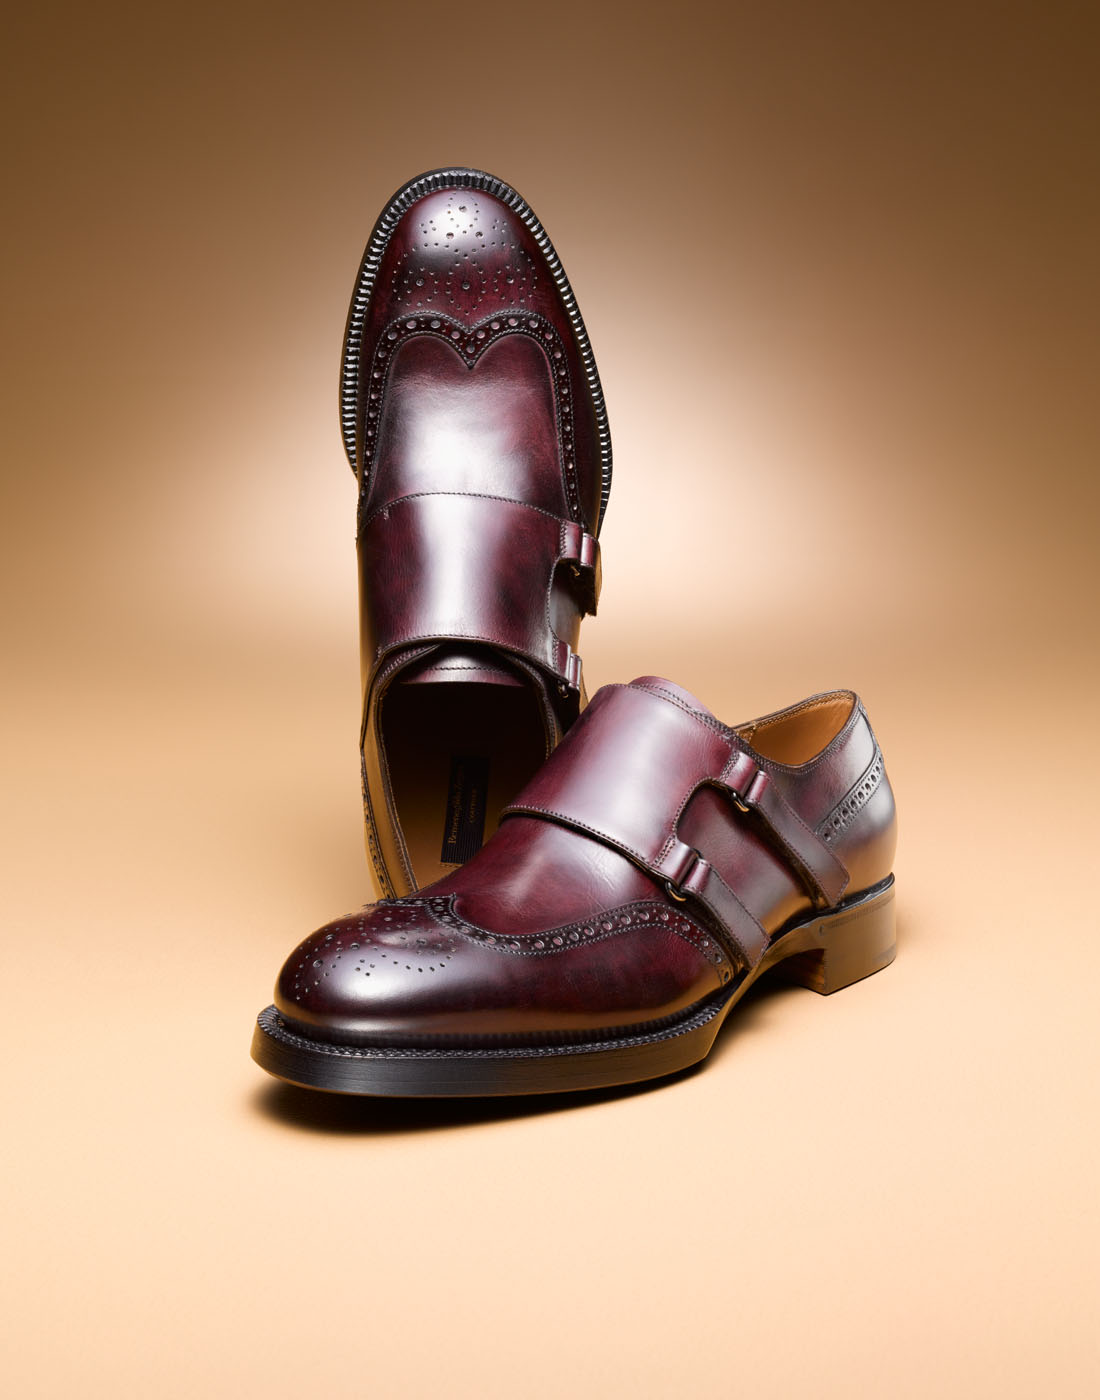 Leather shoes standing up by Alexander Kent London based still life and product photographer.